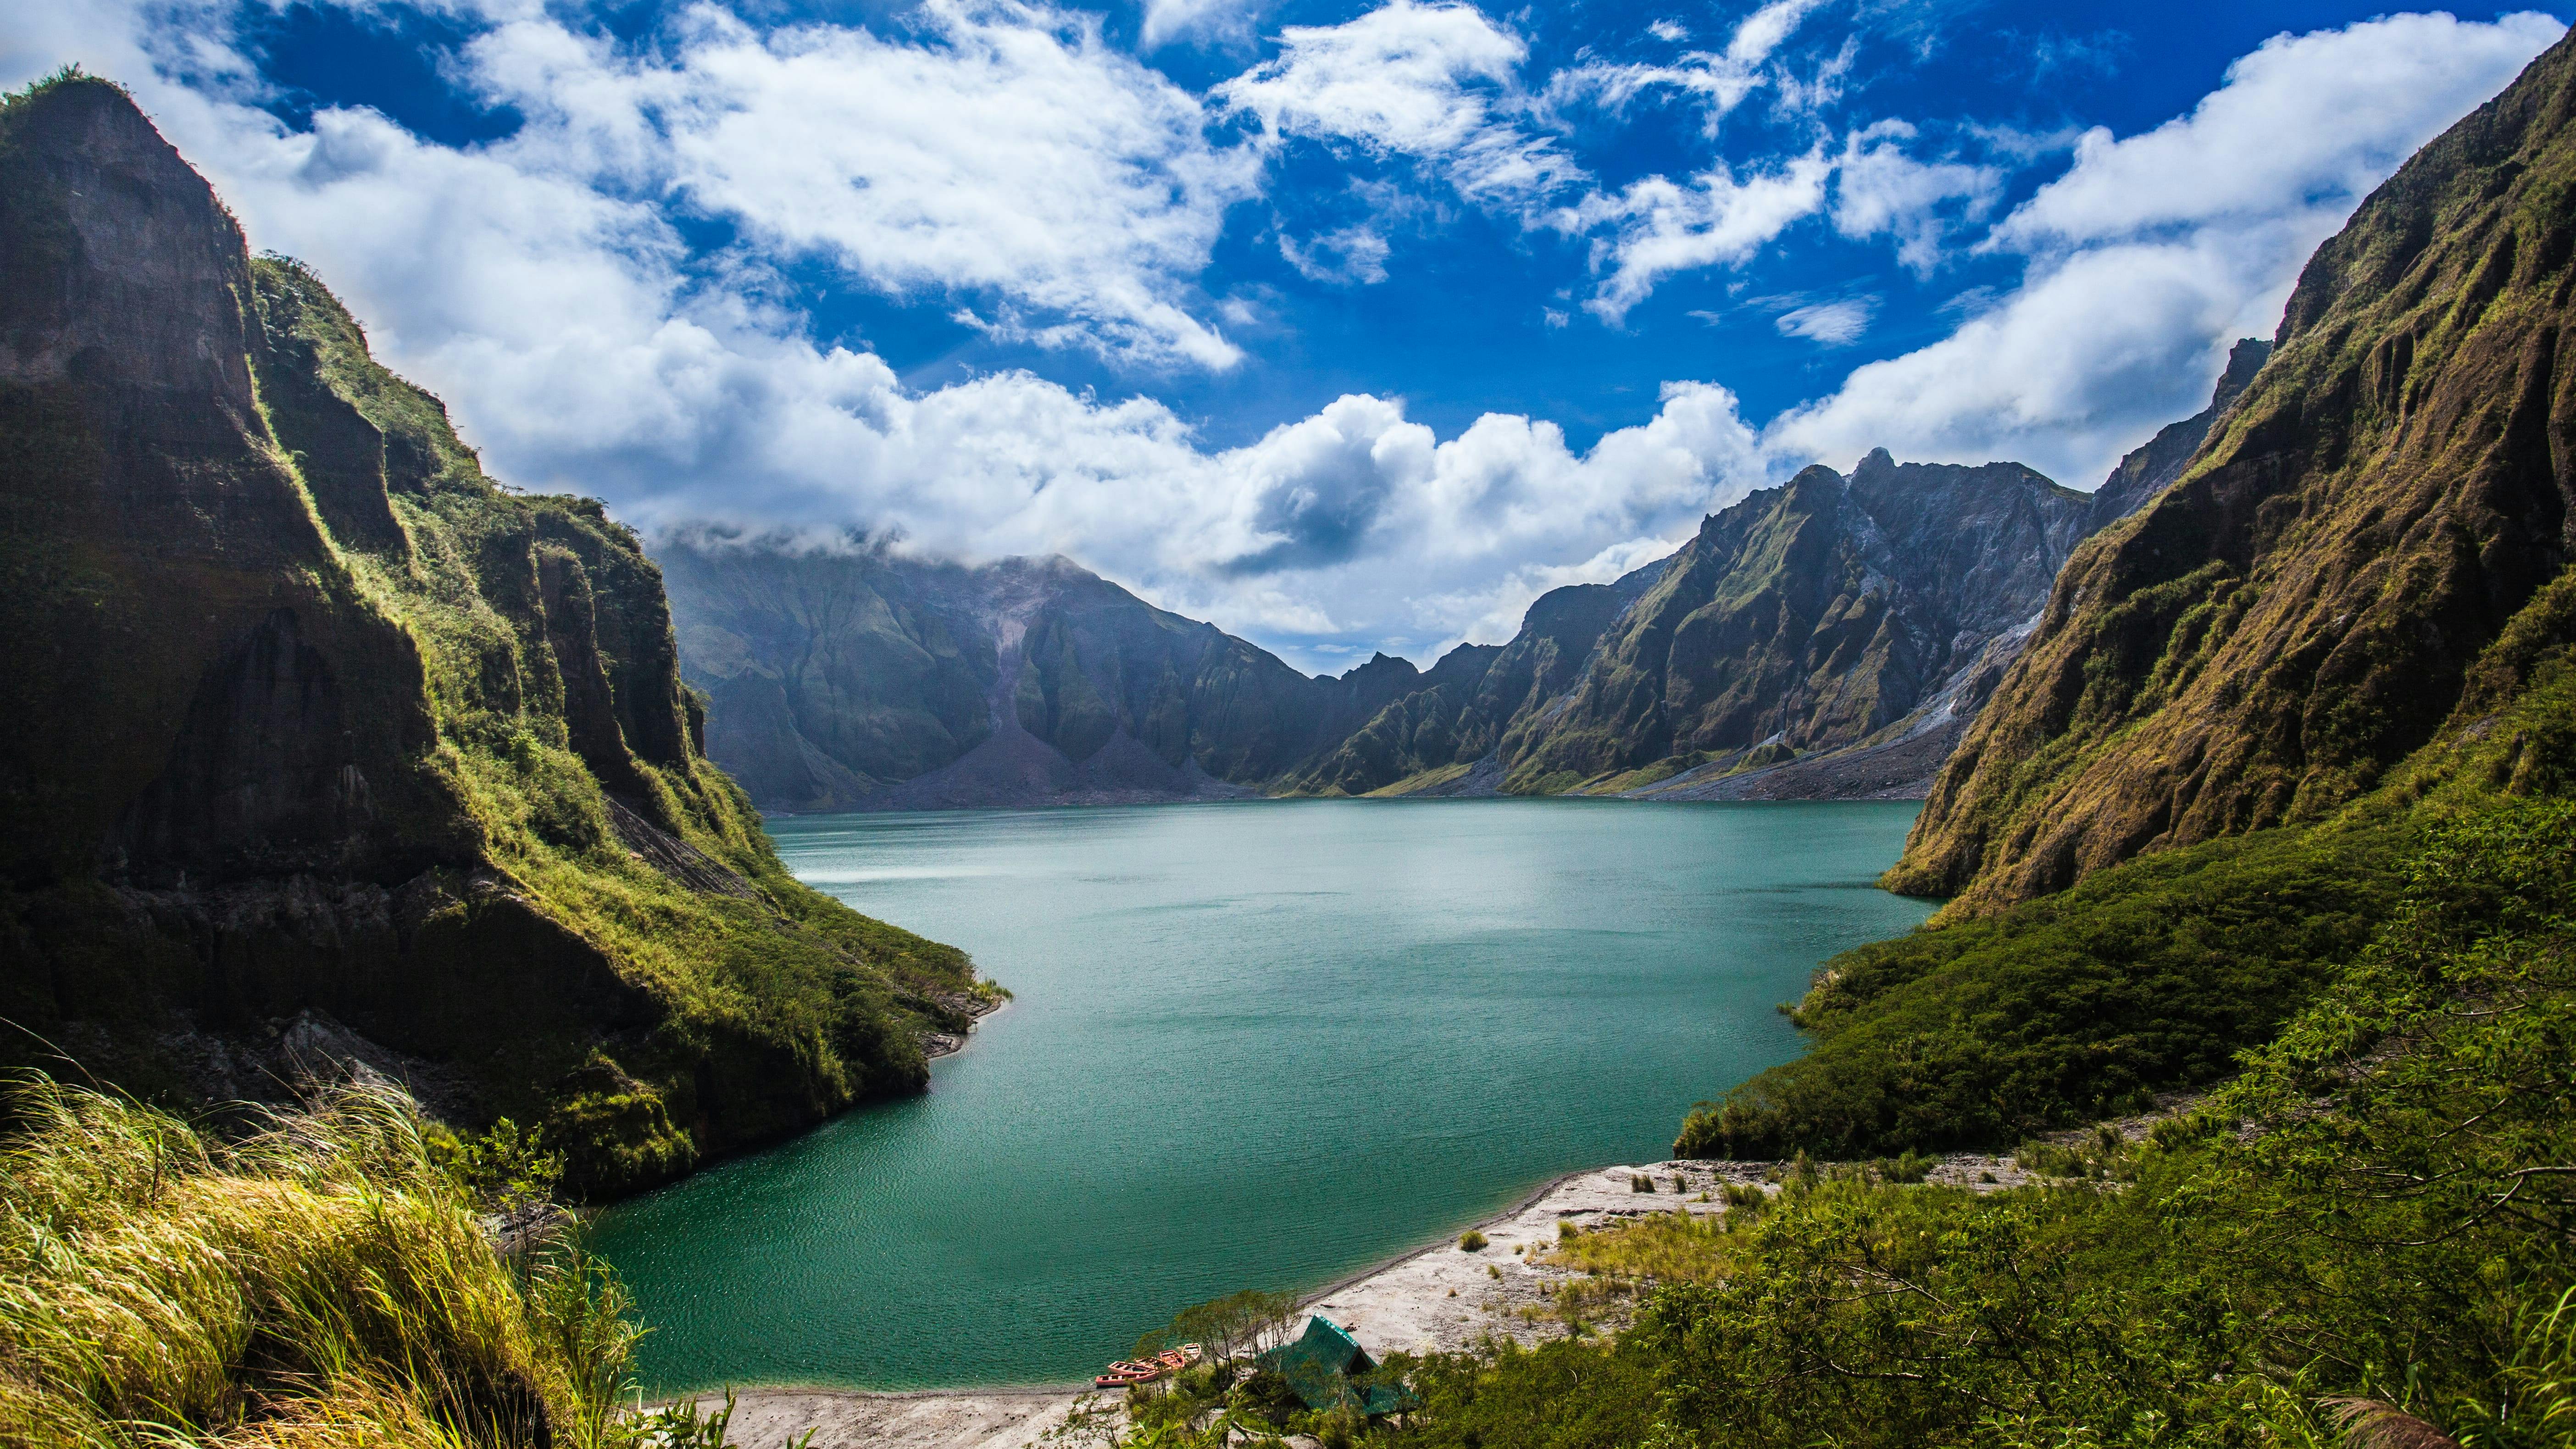 View at the summit of Mt. Pinatubo